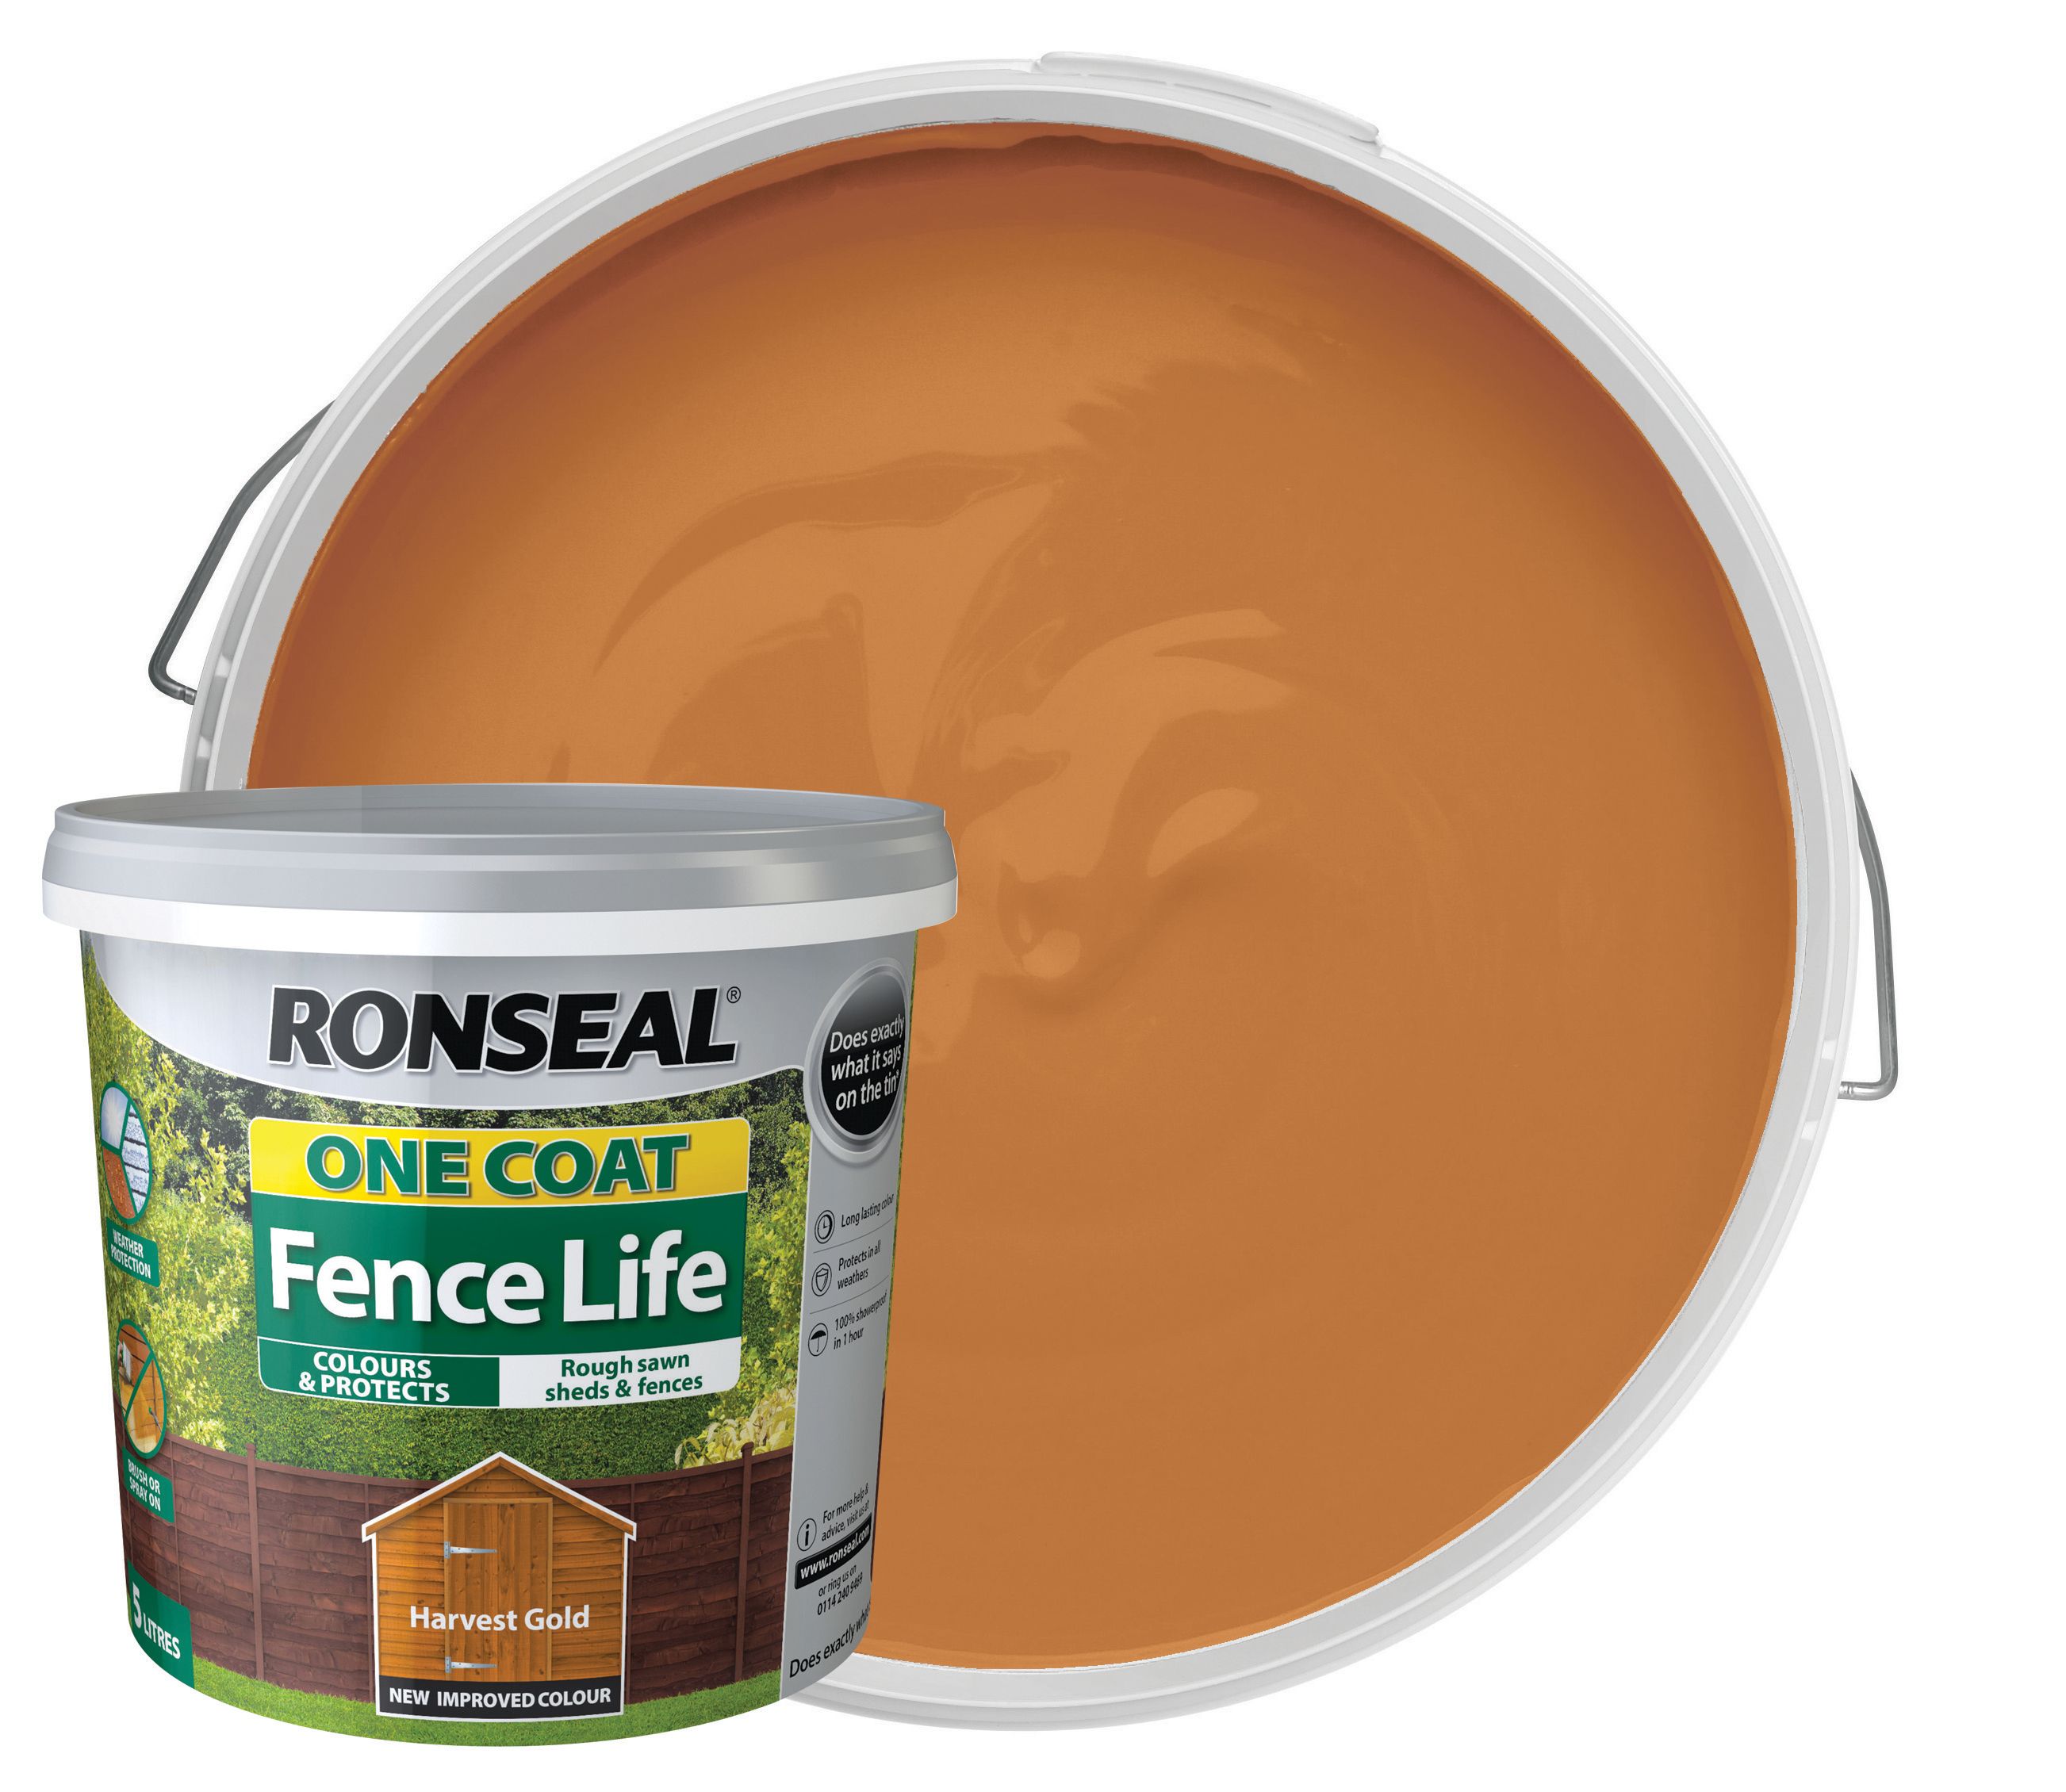 Ronseal One Coat Fence Life Matt Shed & Fence Treatment - Harvest Gold - 5L